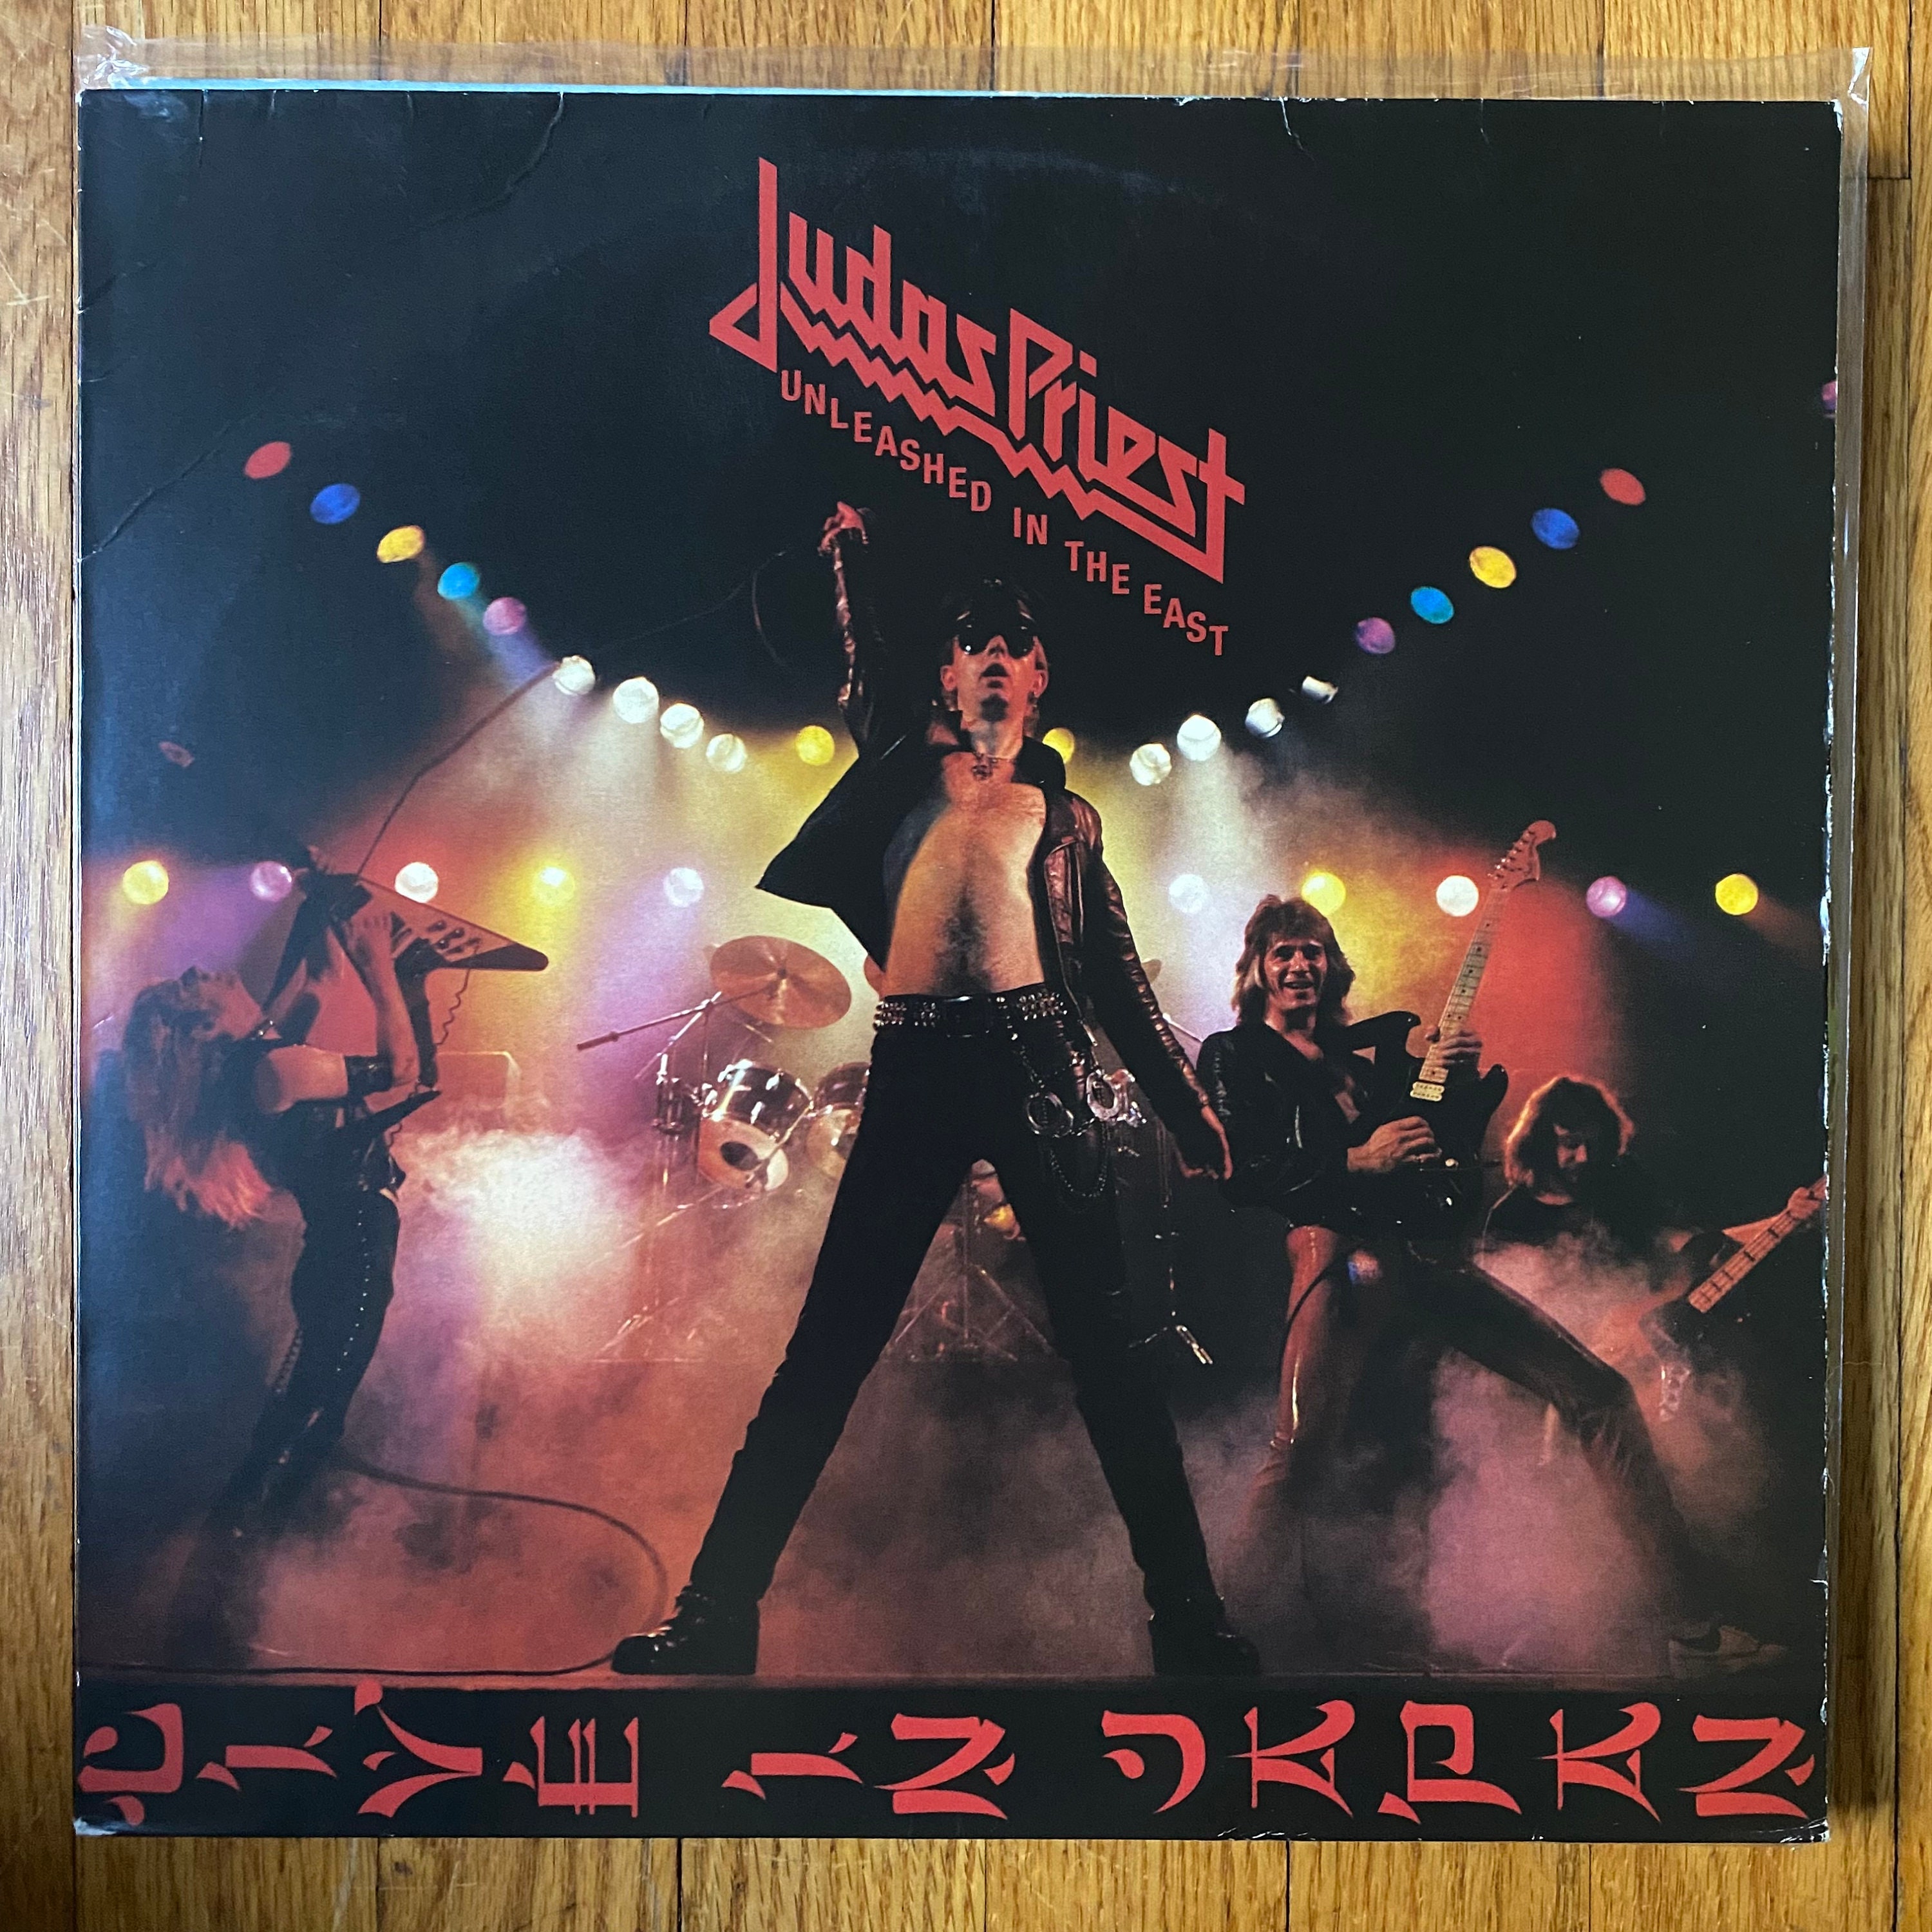 Judas Priest / Unleashed in the East. Classic 1979 Heavy Metal LP